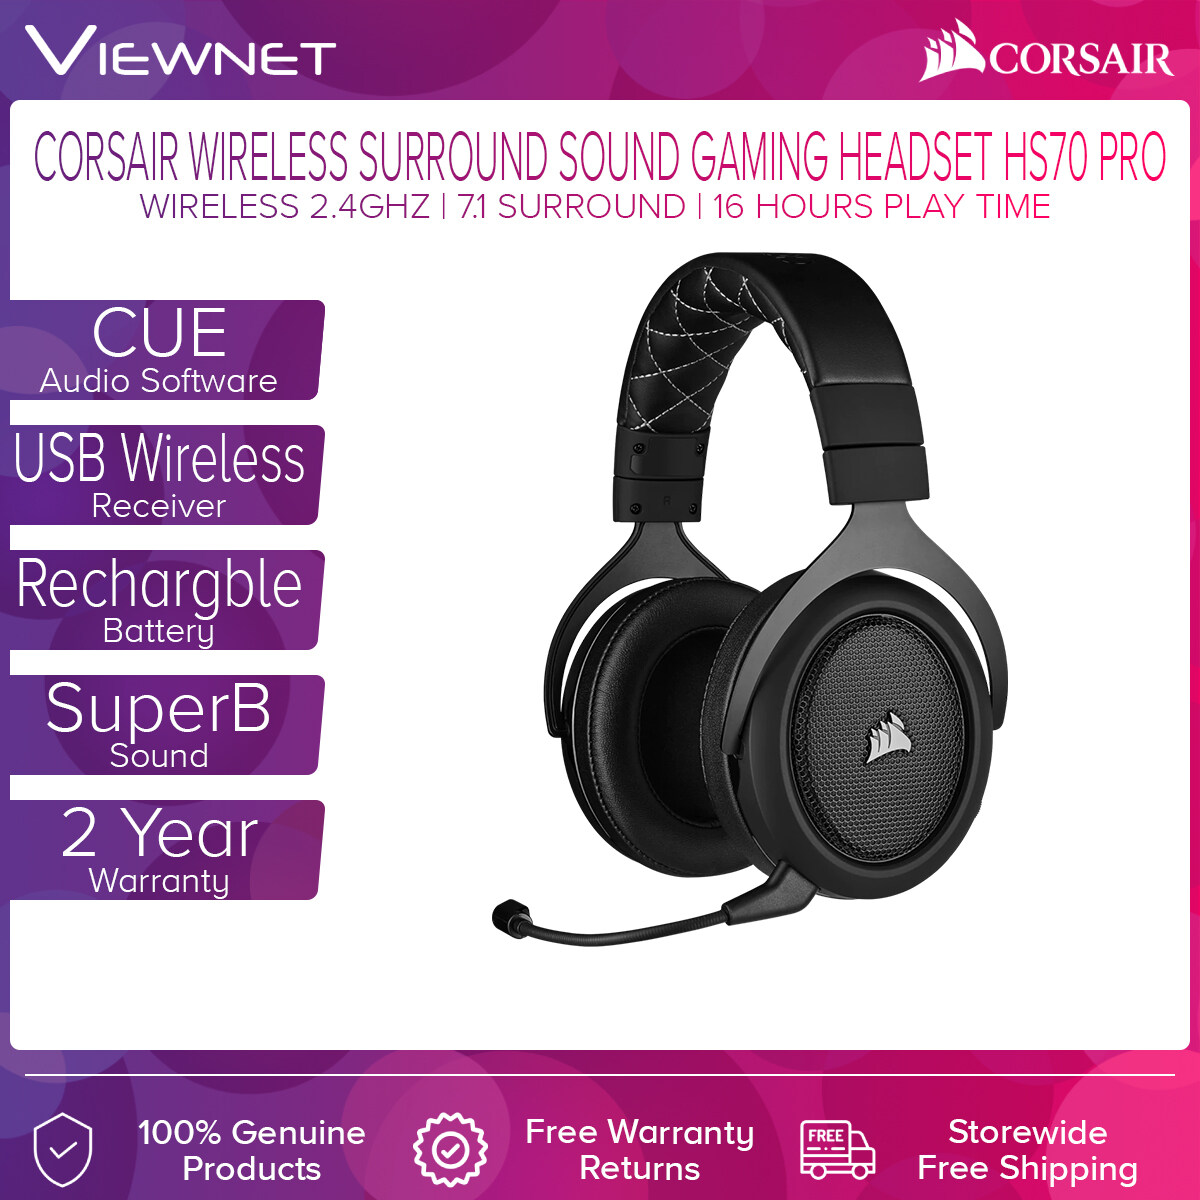 Corsair Wireless USB Surround Sound Gaming Headset HS70 PRO with 7.1 Surround Sound, 2.4 16 Hour Play Time, CUE Software, USB Wireless Receiver, SuperB Sound, For Comfort | Lazada